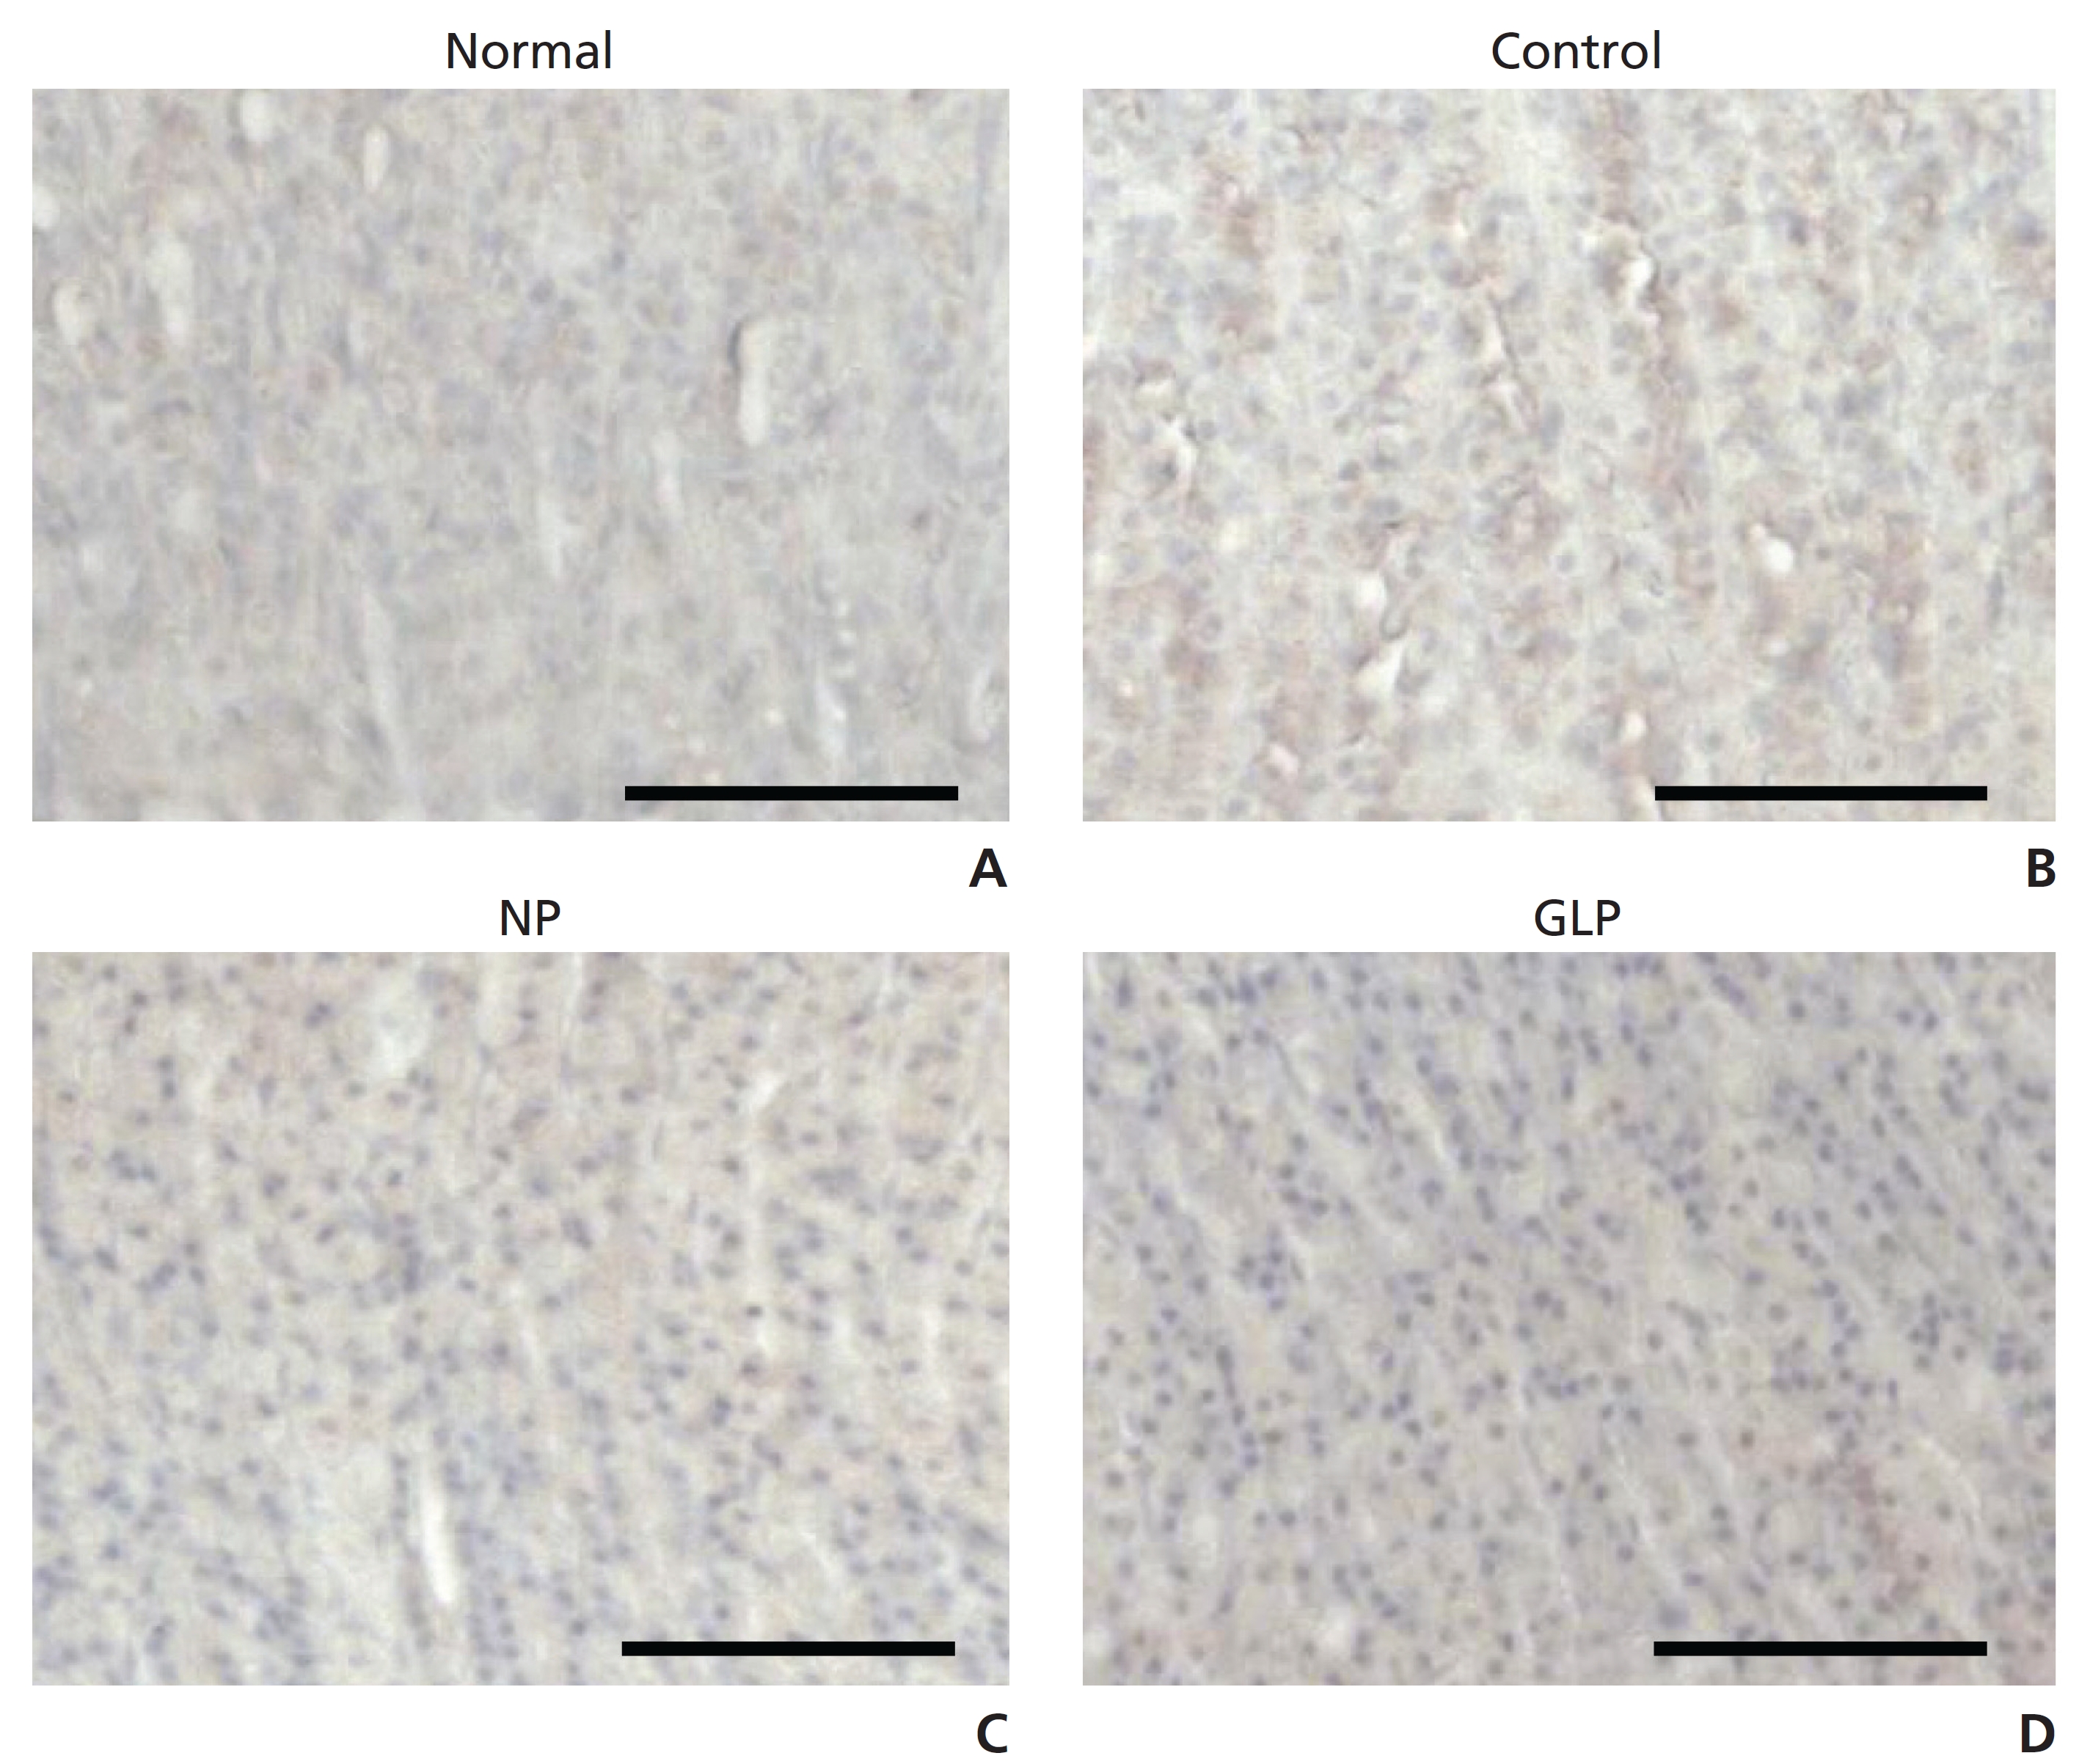 Immunohistochemical staining of TGF-β1 proteins in EtOH/HCl-induced acute gastric ulcers in rats. Scale bar = 100 ㎛. Magnification:
100 ×; NP, injection of saline; GLP, injection of Ganoderma lucidum pharmacopuncture.